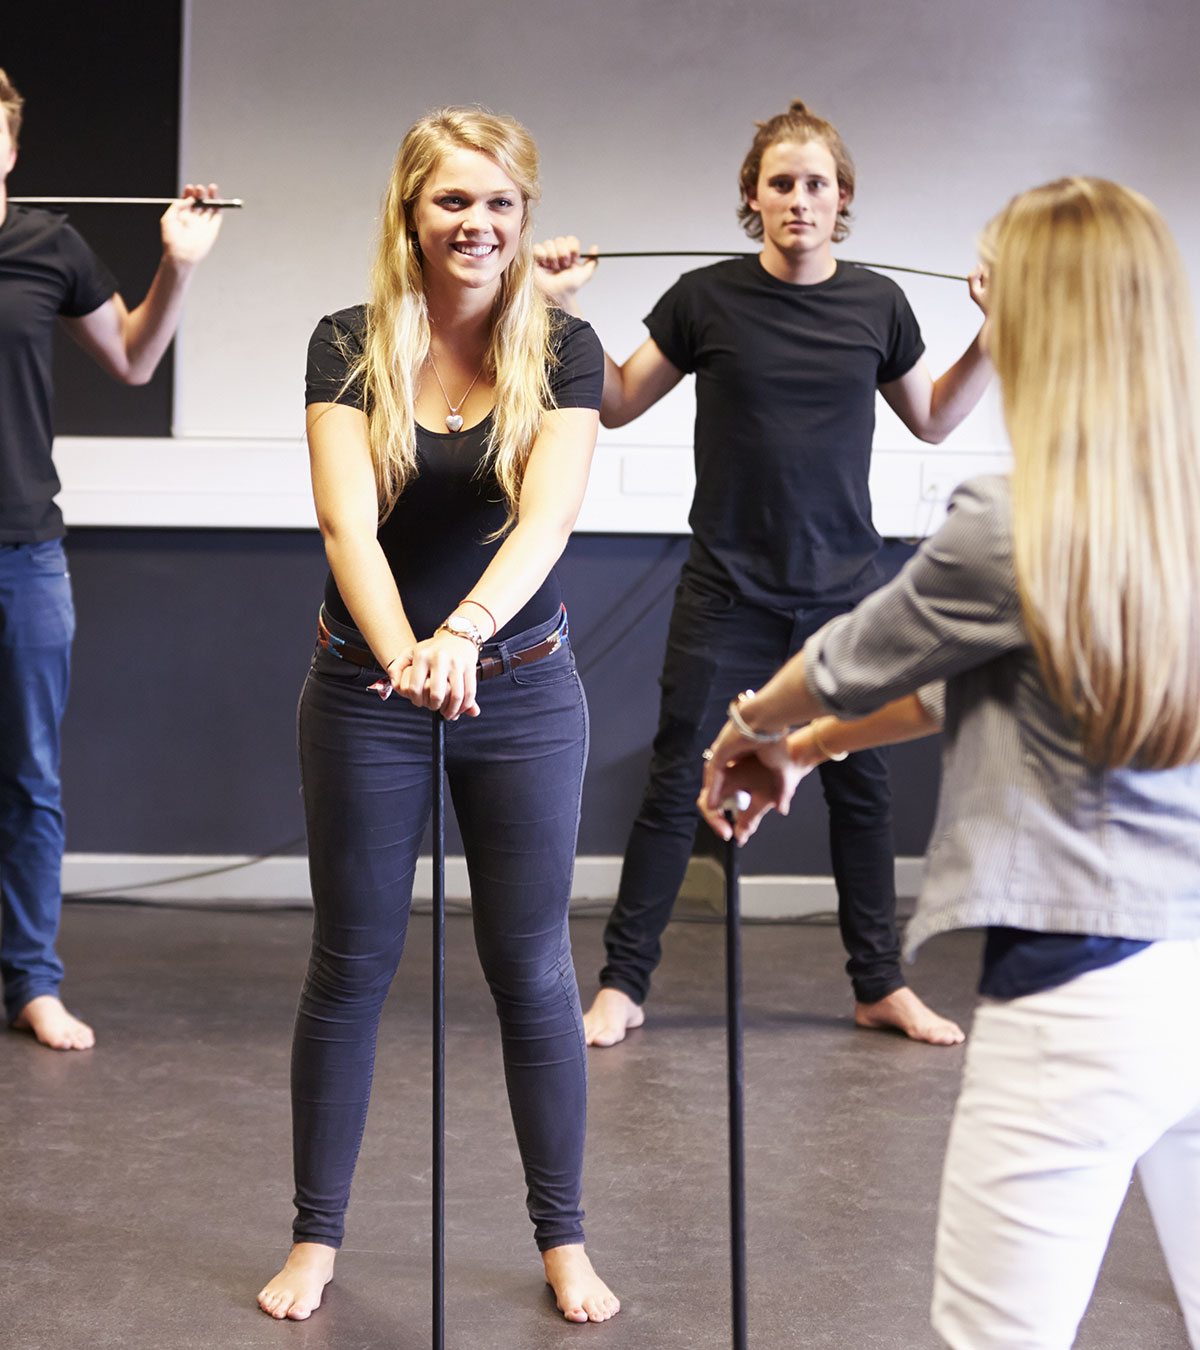 15 Engrossing Drama And Improv Games For Teens